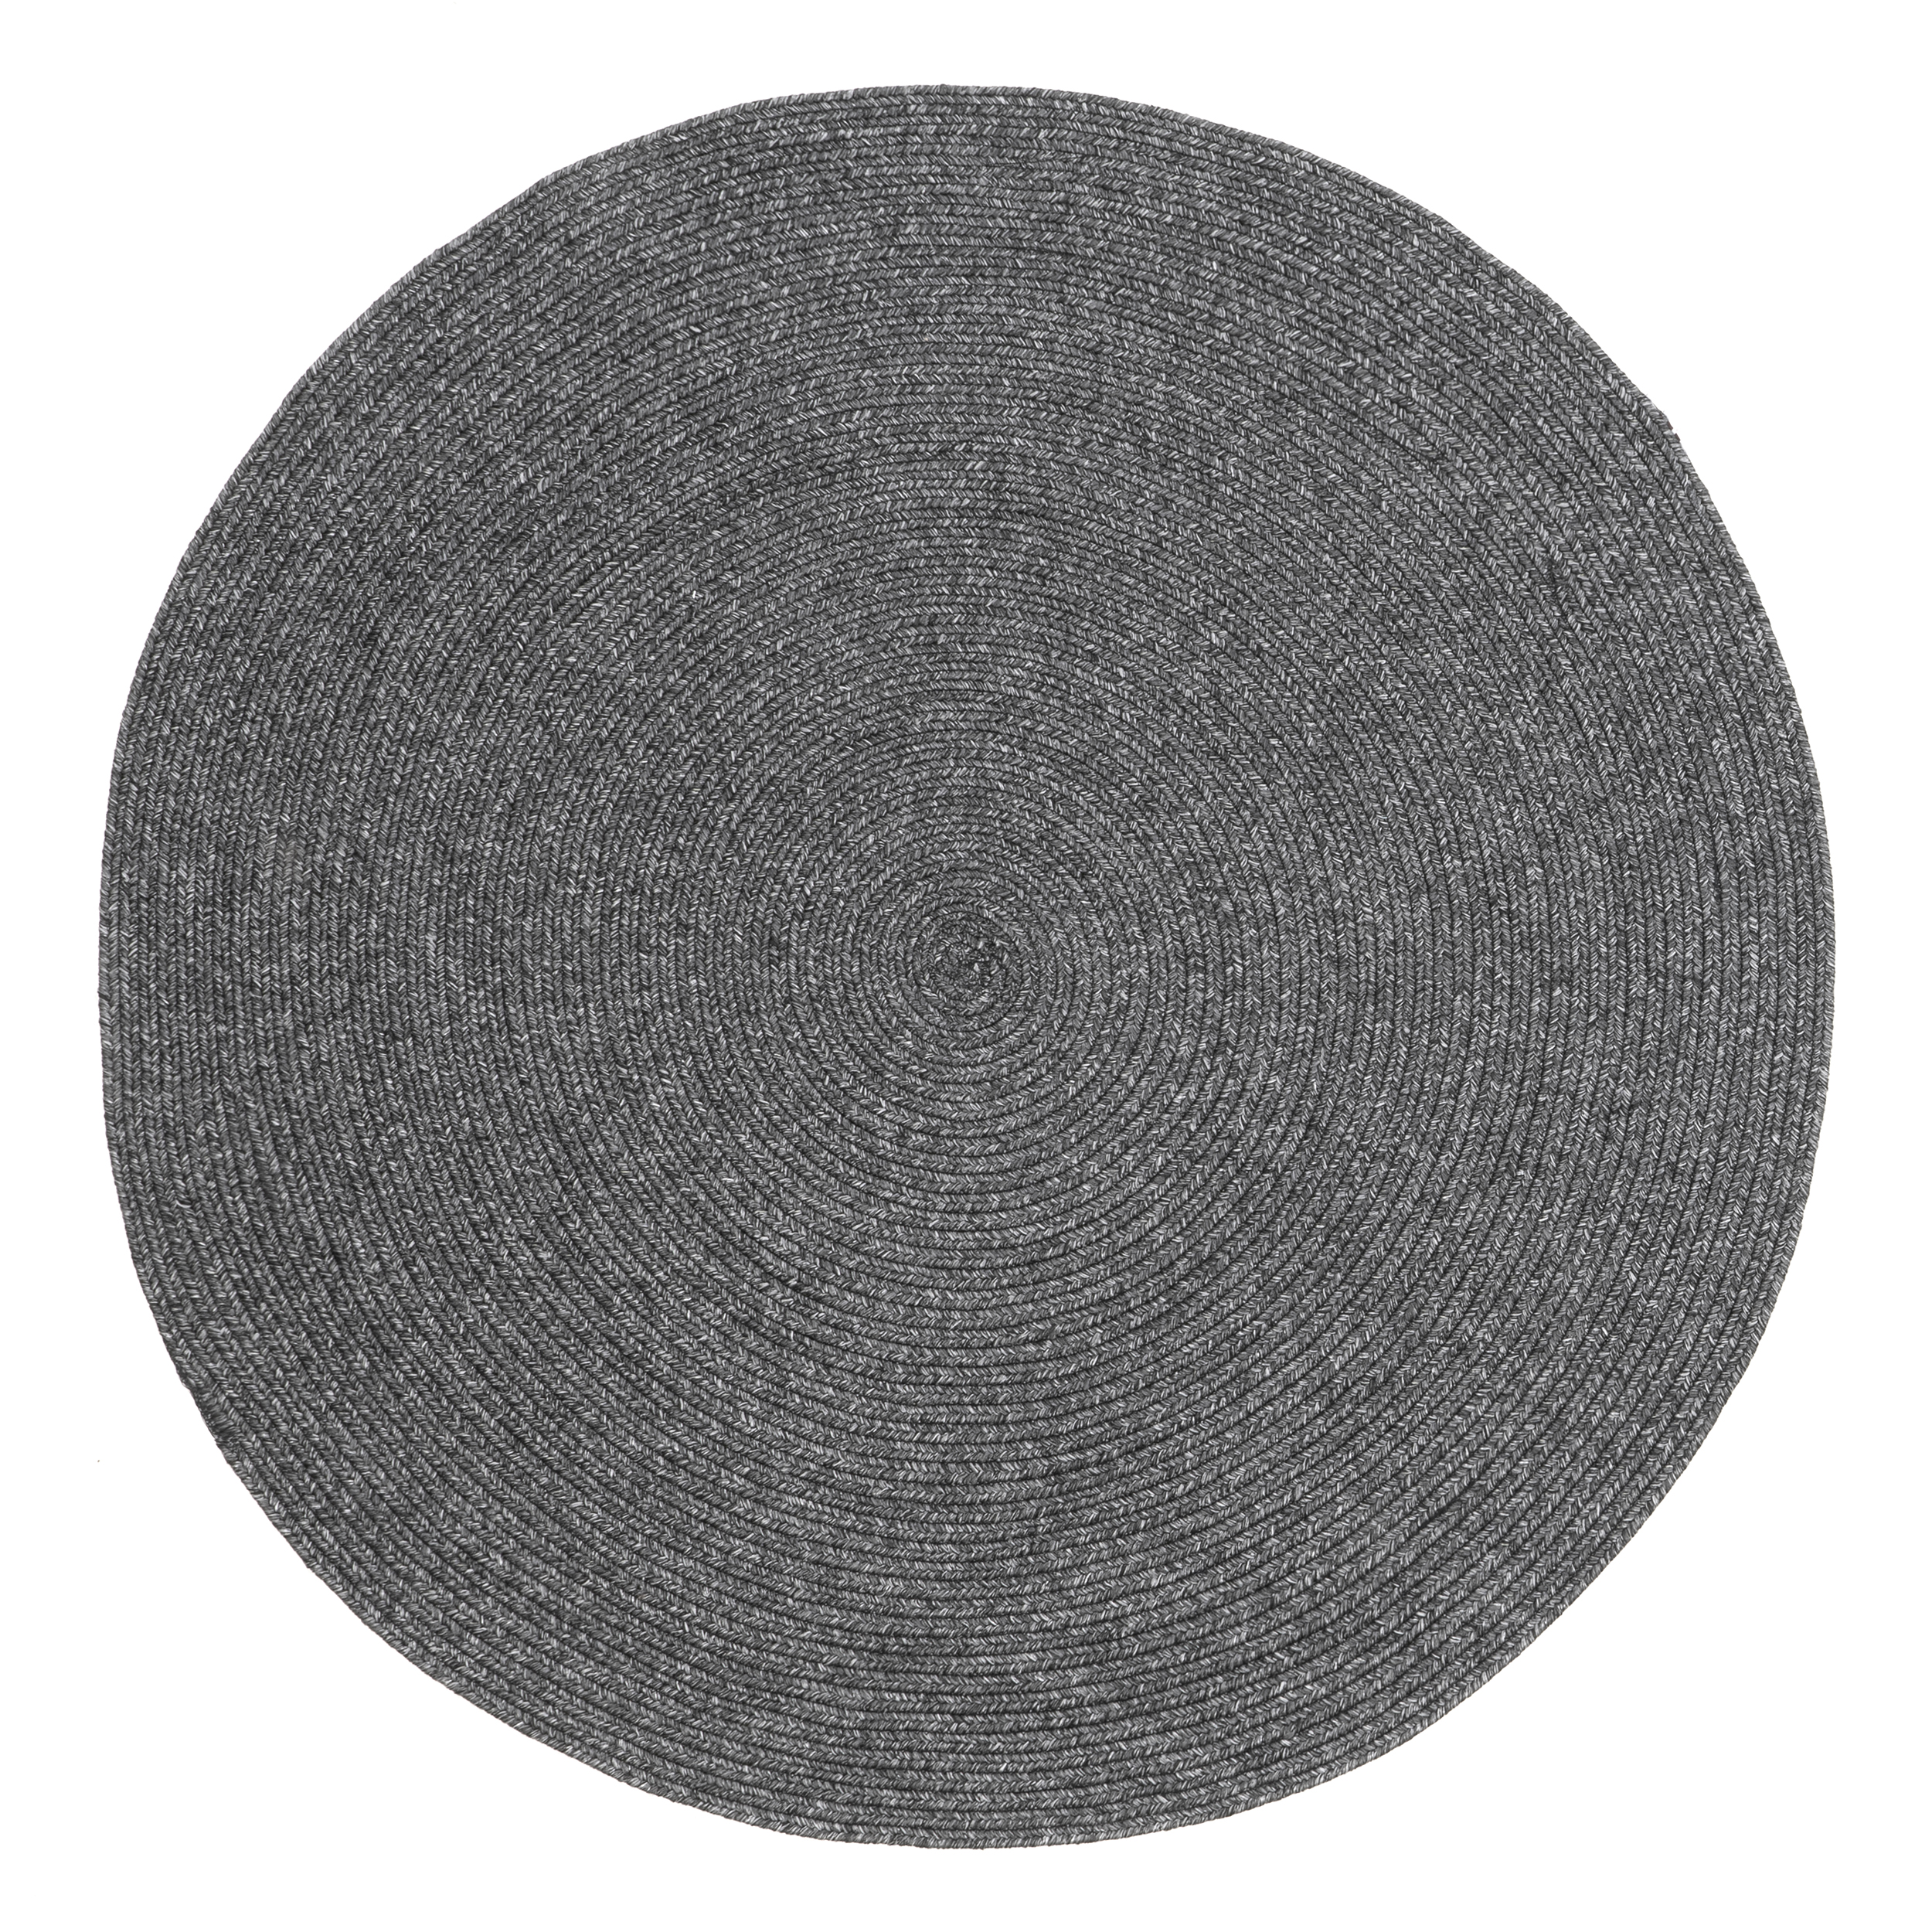 nuLOOM Wynn Braided Indoor/Outdoor Area Rug, 6' Round, Charcoal - image 1 of 2